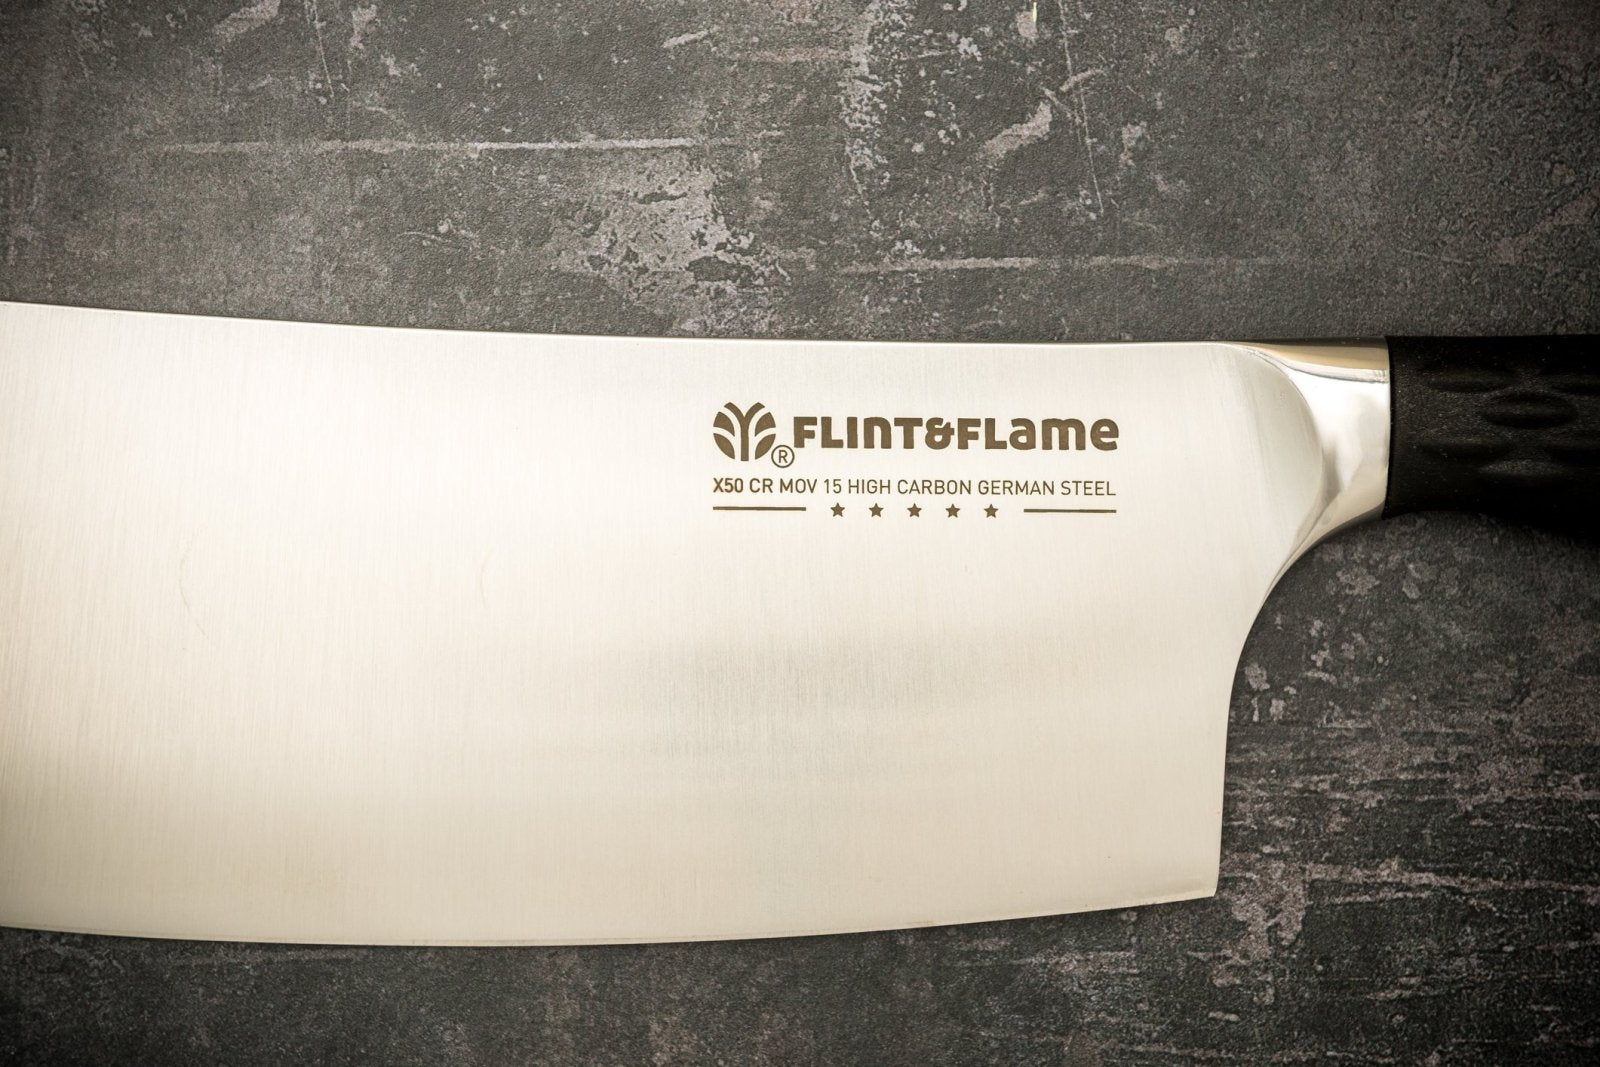 Flint & Flame Pro Series 8" Butcher's Cleaver - PS-8CLEAVE-BP - The Cotswold Knife Company